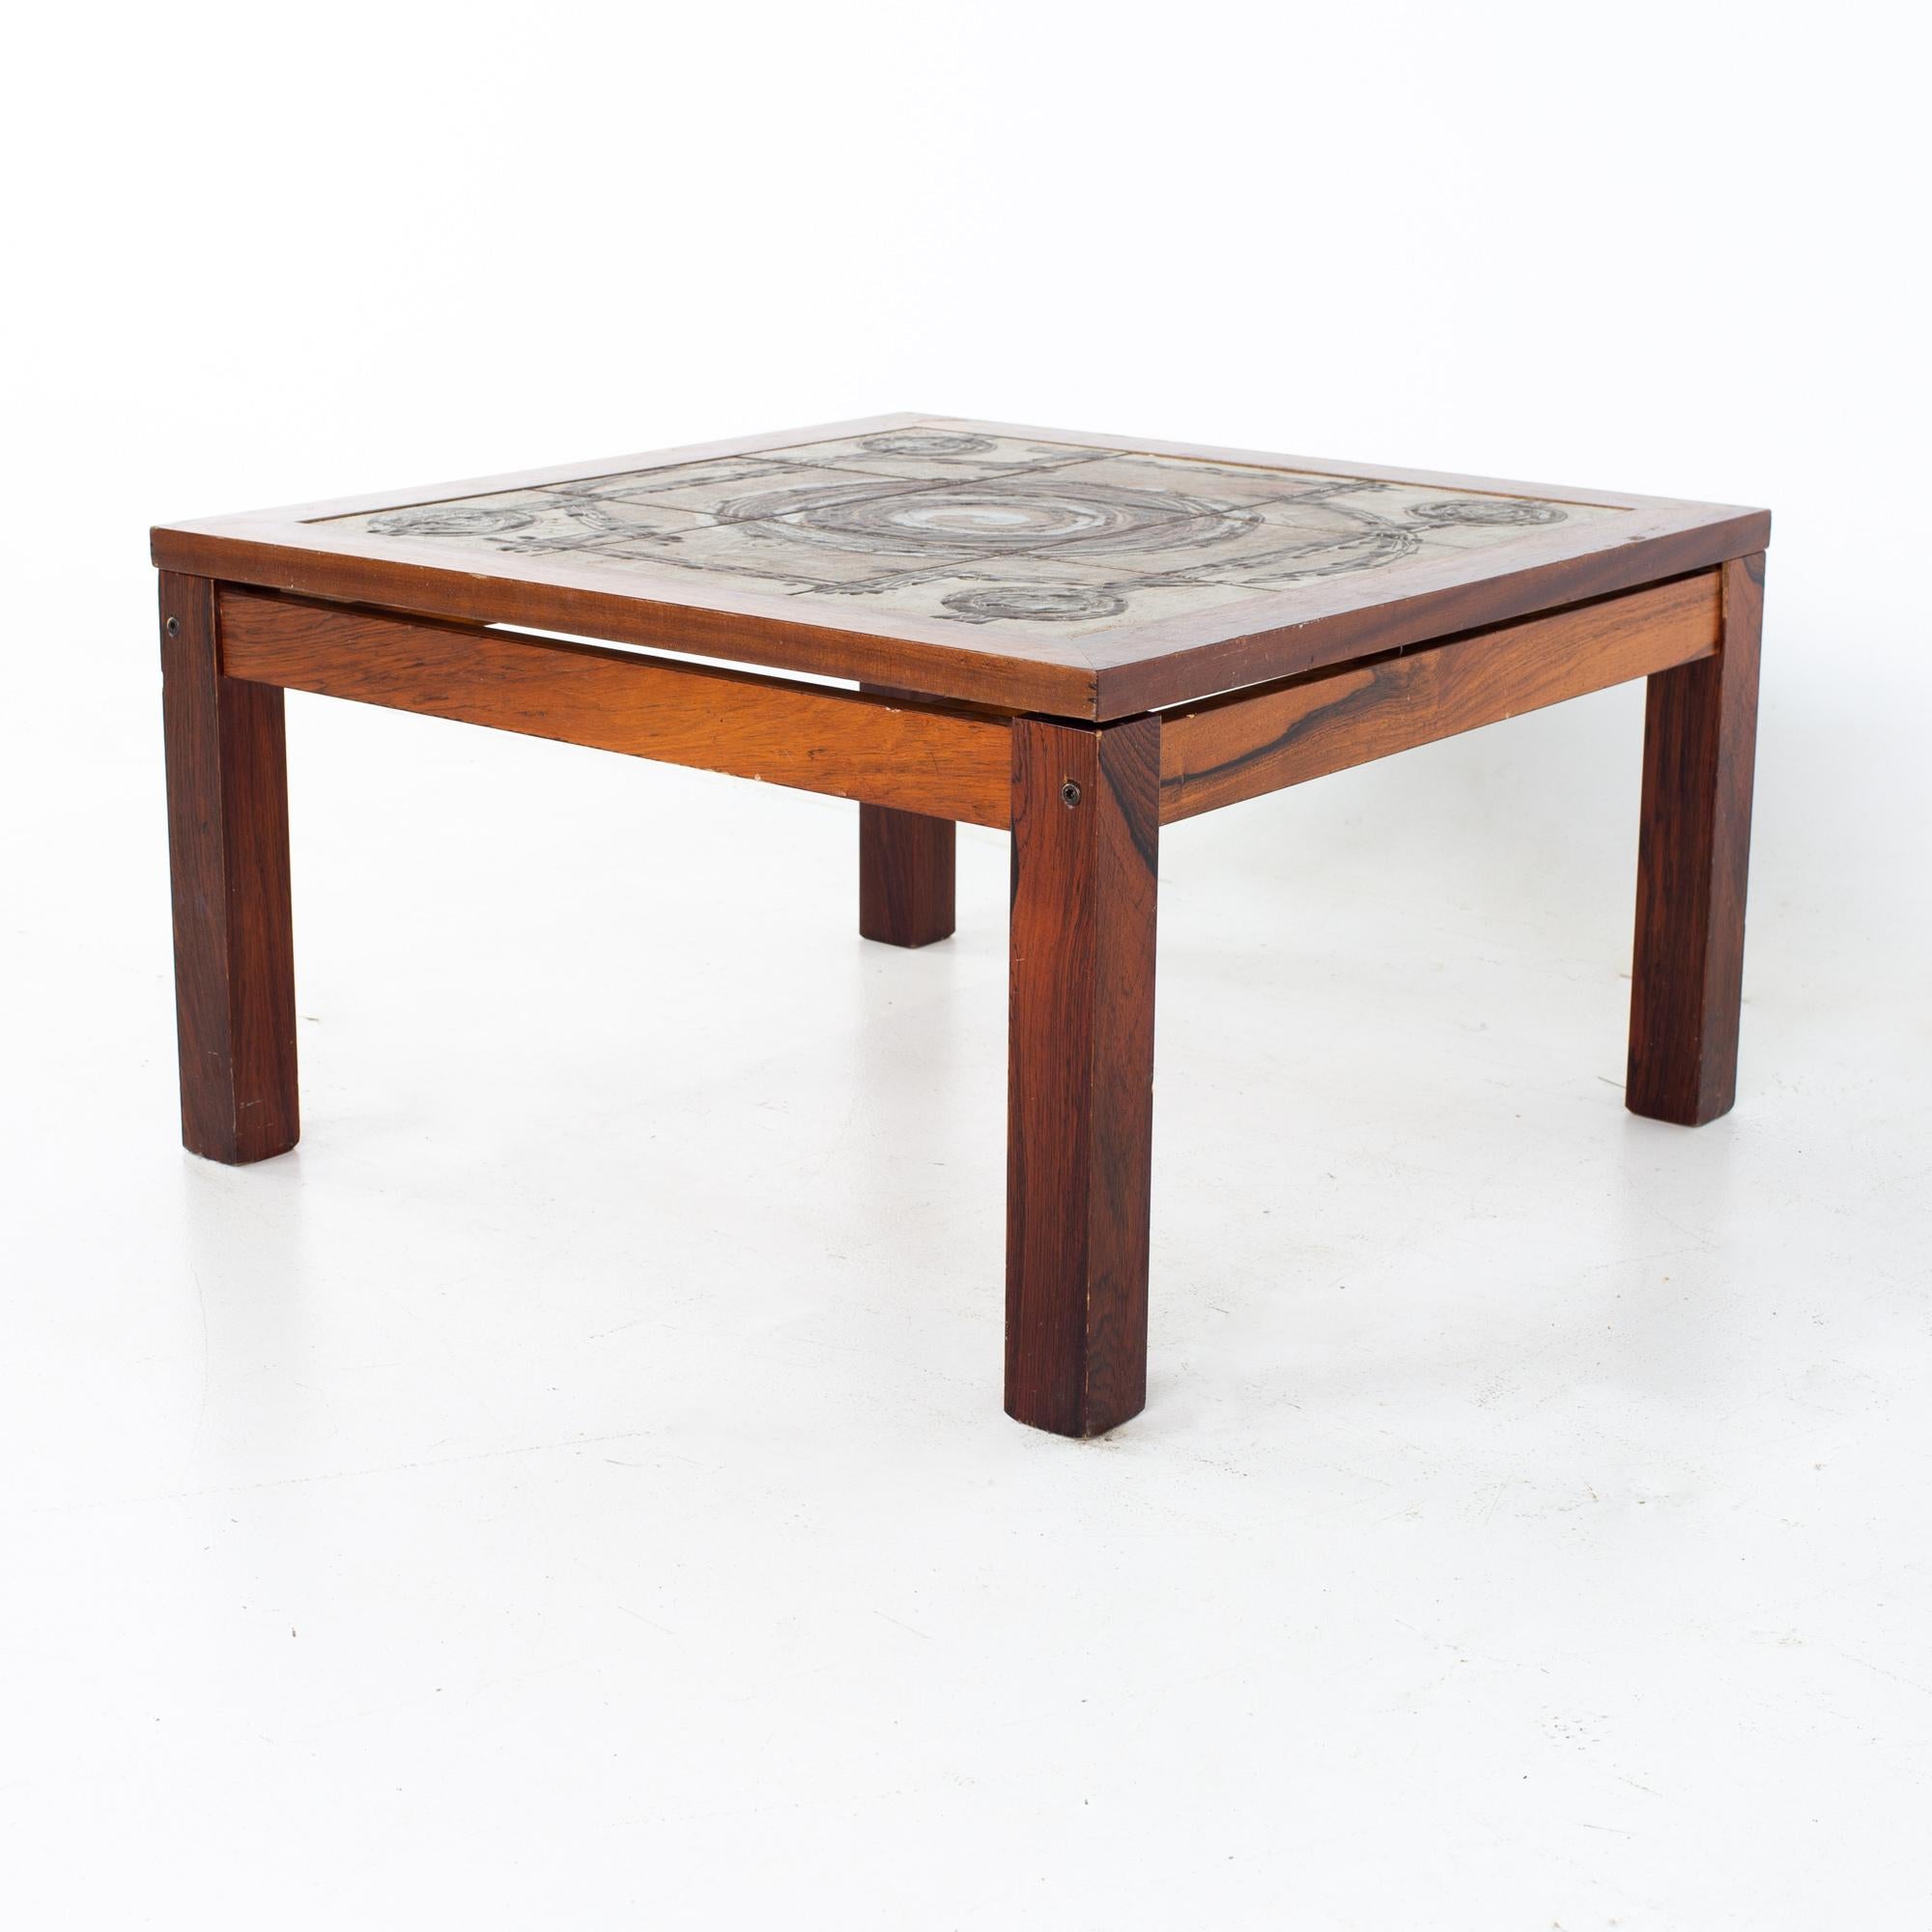 Gangso Mobler mid century teak and tile side end table.
End table measures: 29 wide x 29 deep x 16.25 inches high

All pieces of furniture can be had in what we call restored vintage condition. That means the piece is restored upon purchase so